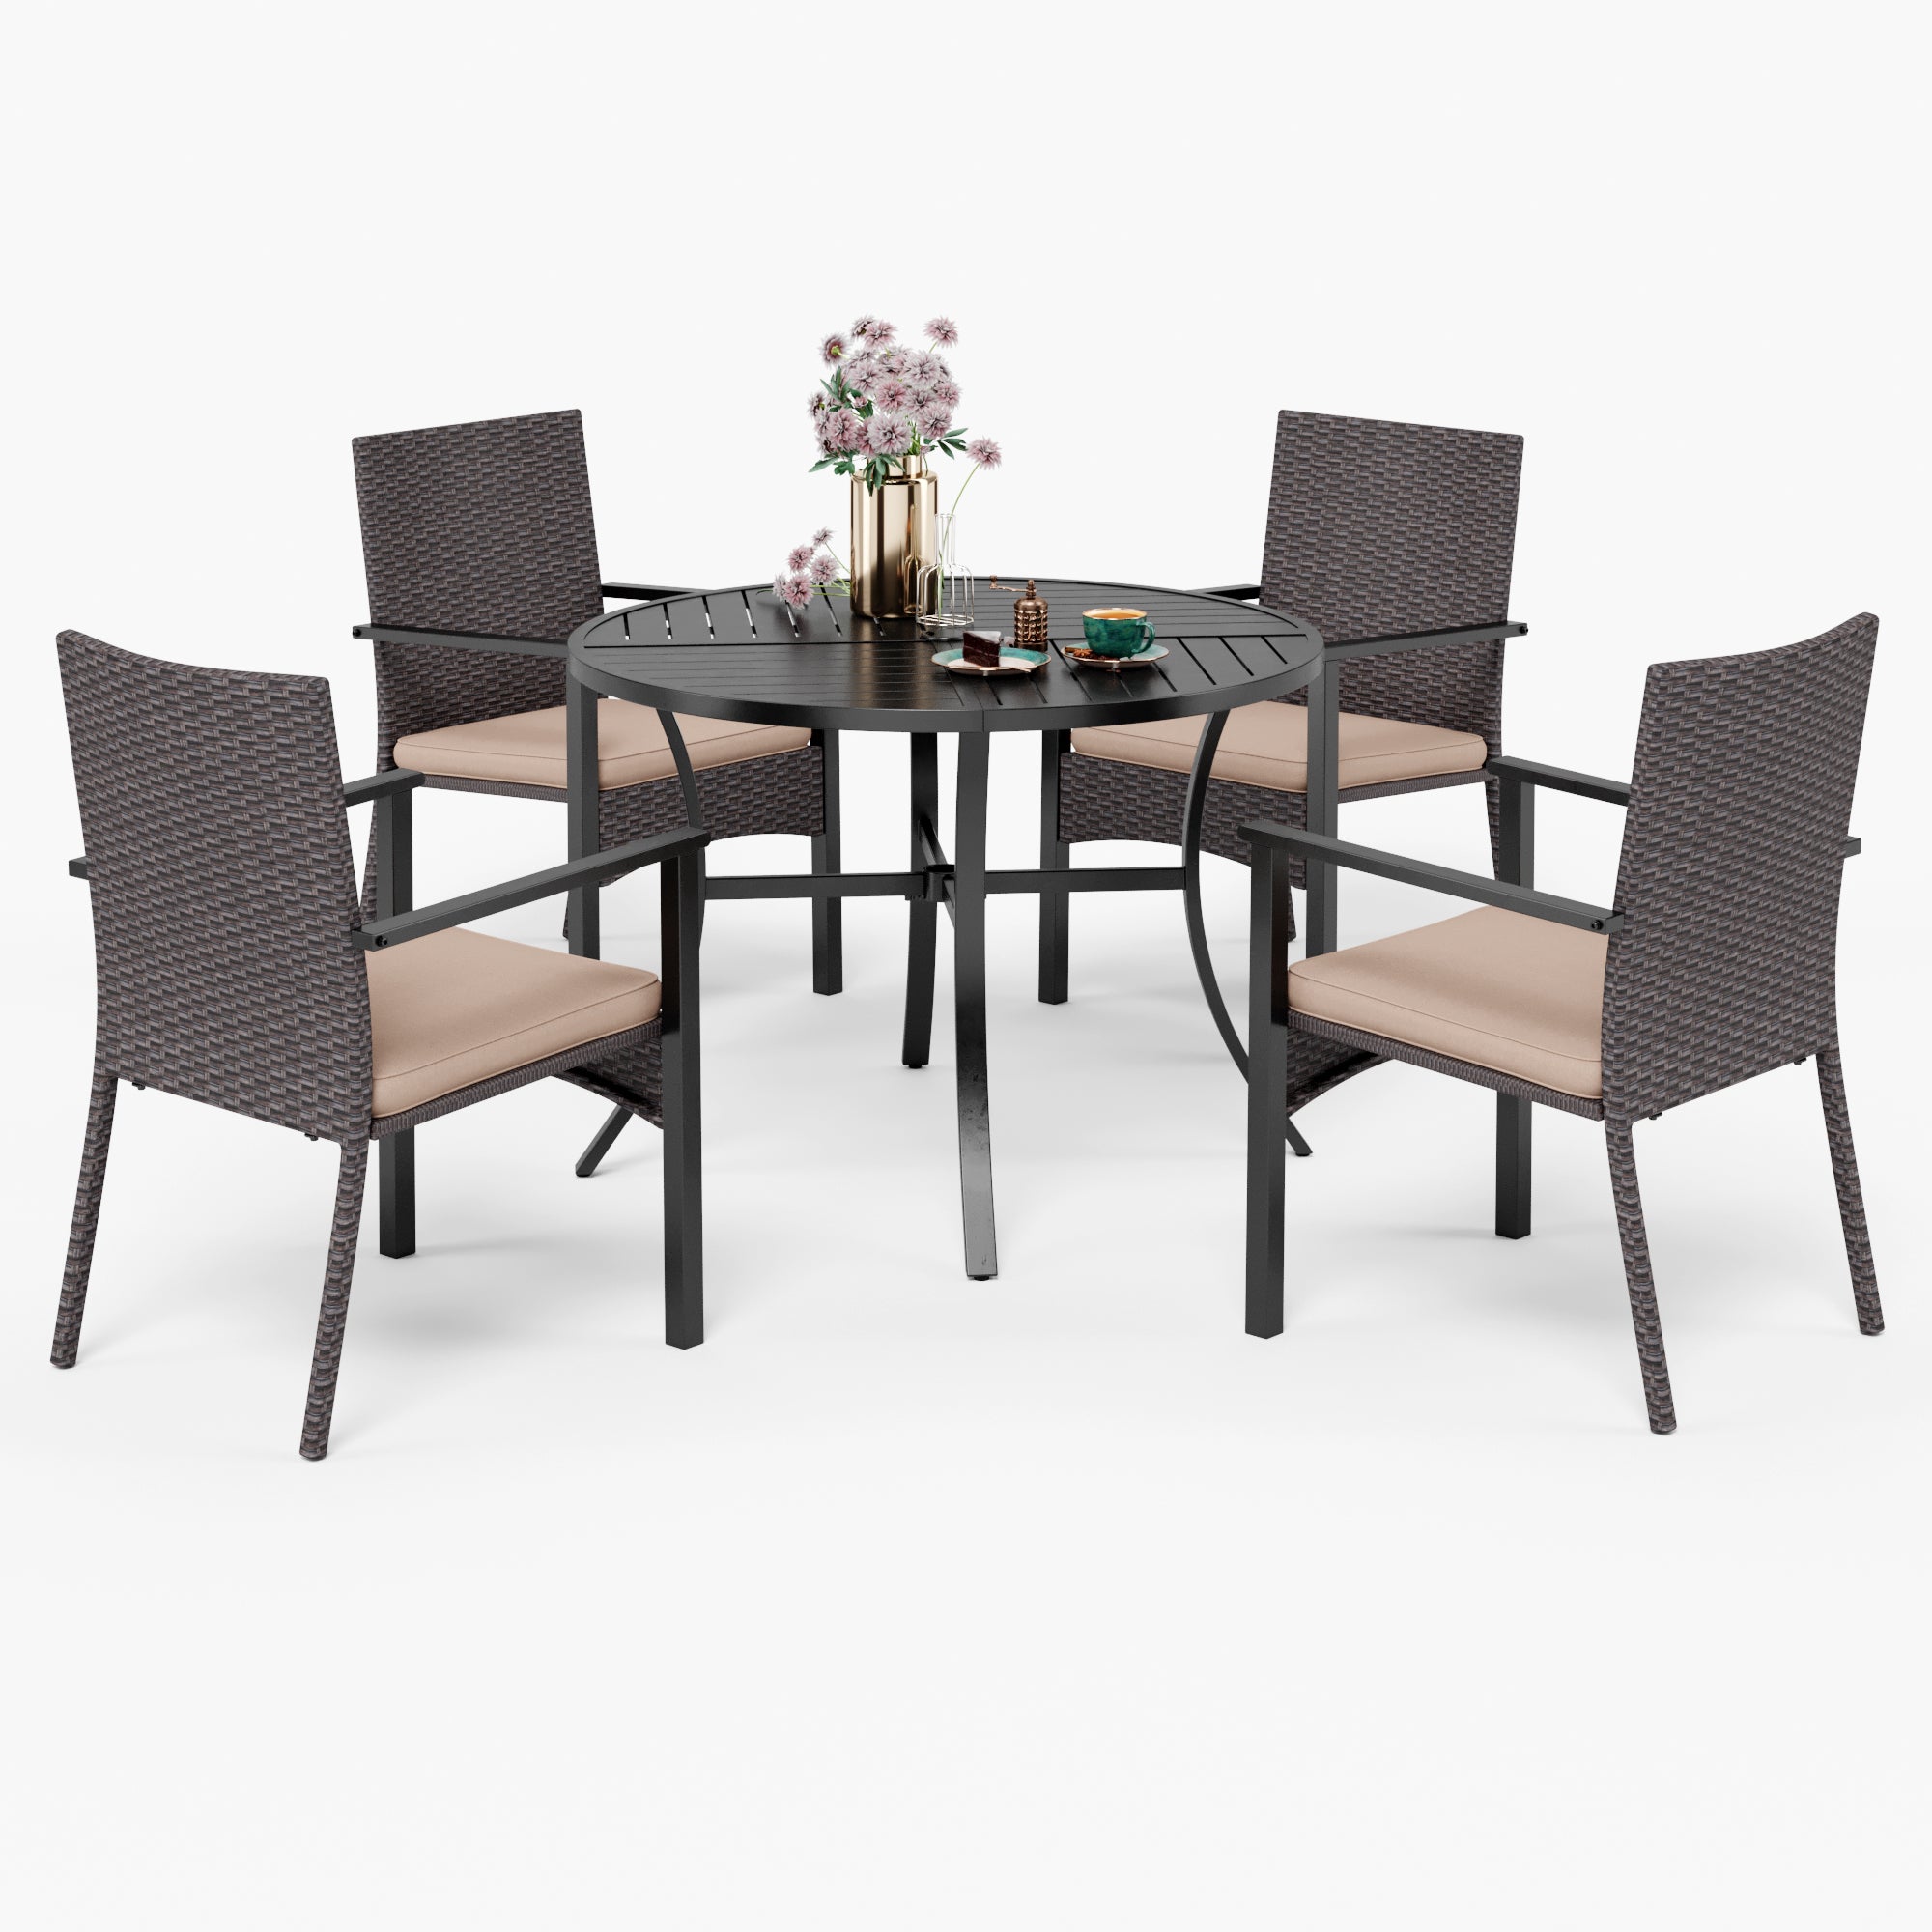 MFSTUDIO 5-Piece Geometrically Stamped Round Table & Rattan Cushion Dining Chairs Outdoor Dining Set